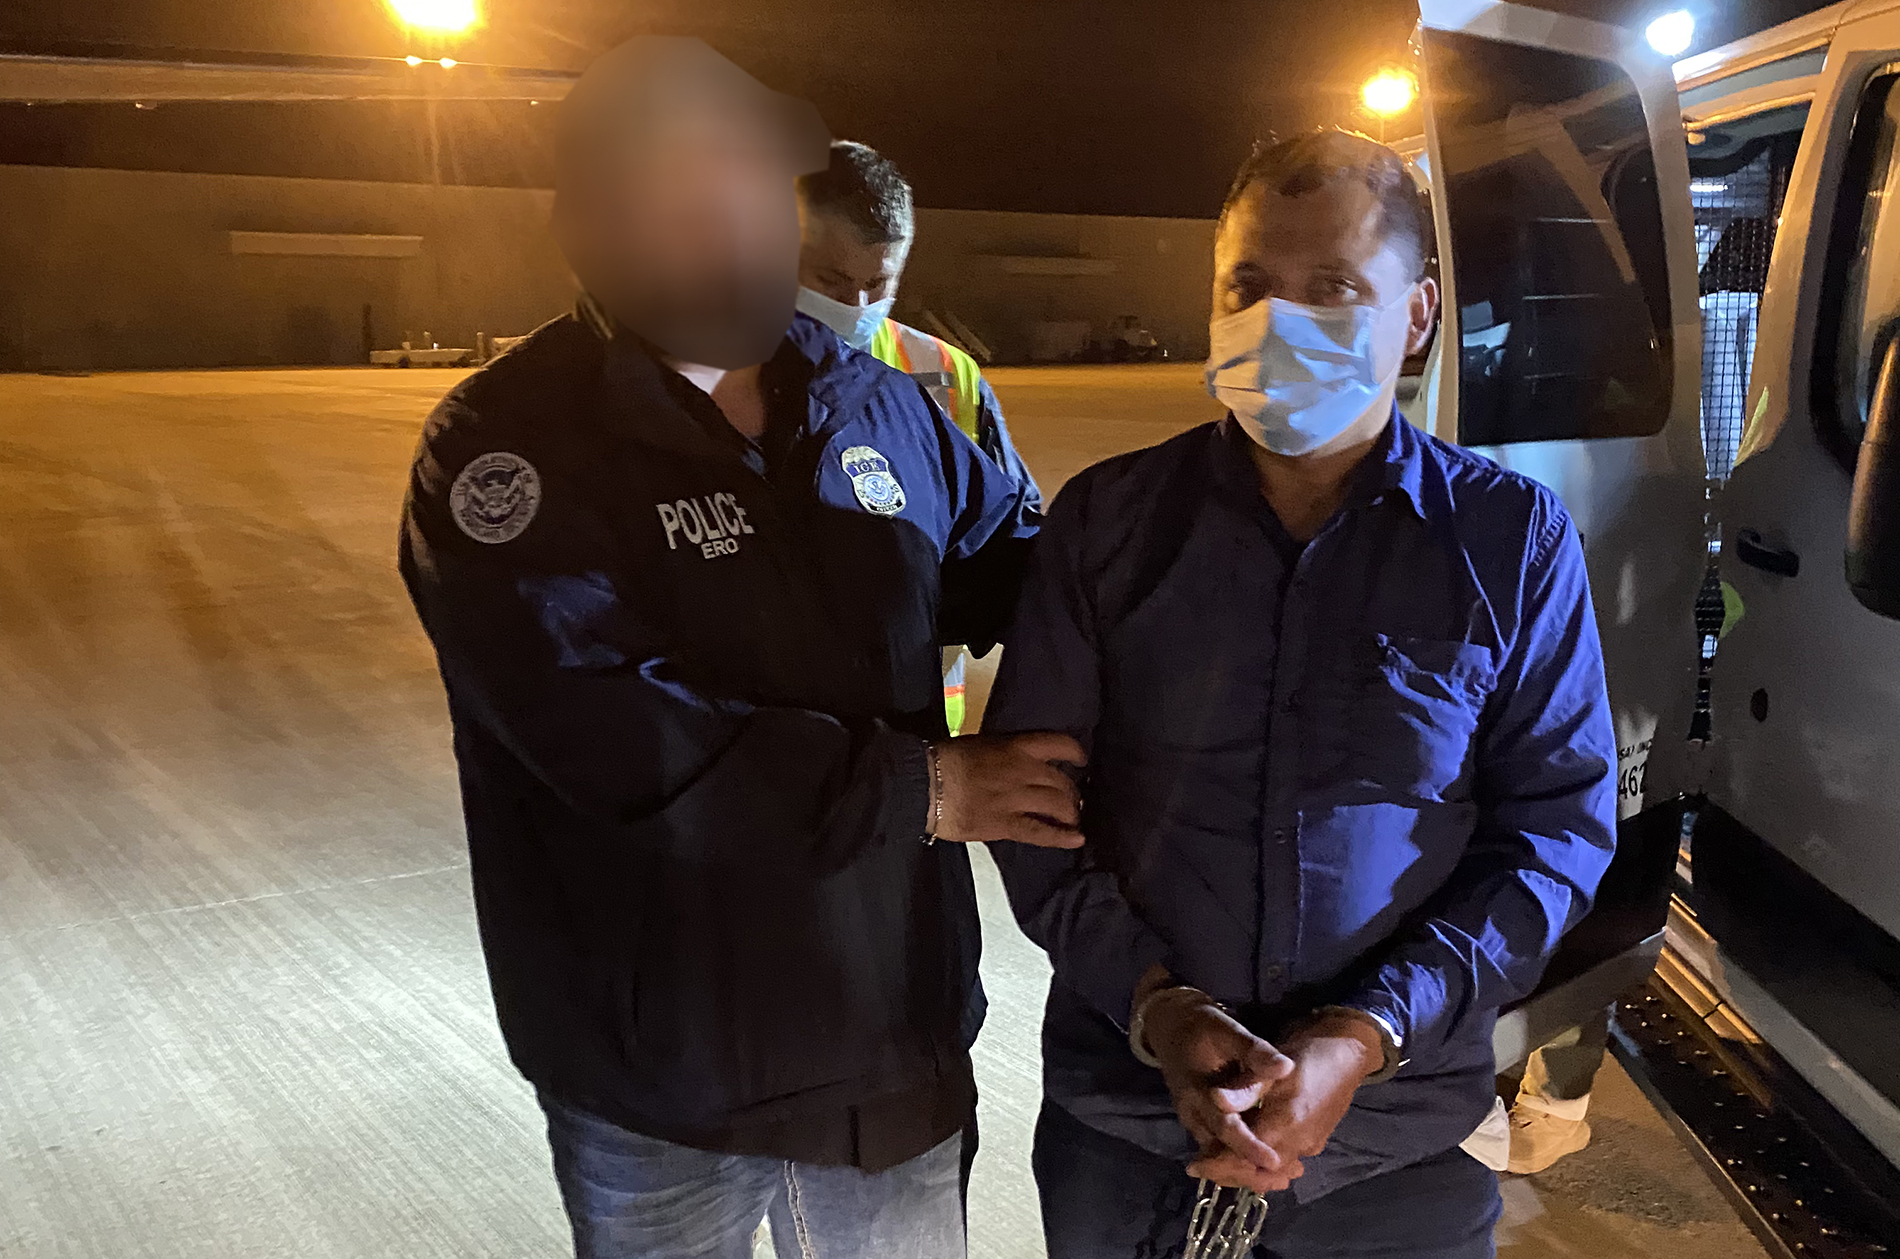 Guatemalan national Moises Paiz Guevara, 47, was flown from Alexandria, Louisiana, to Guatemala International Airport on a flight coordinated by ICE’s Air Operations Unit.